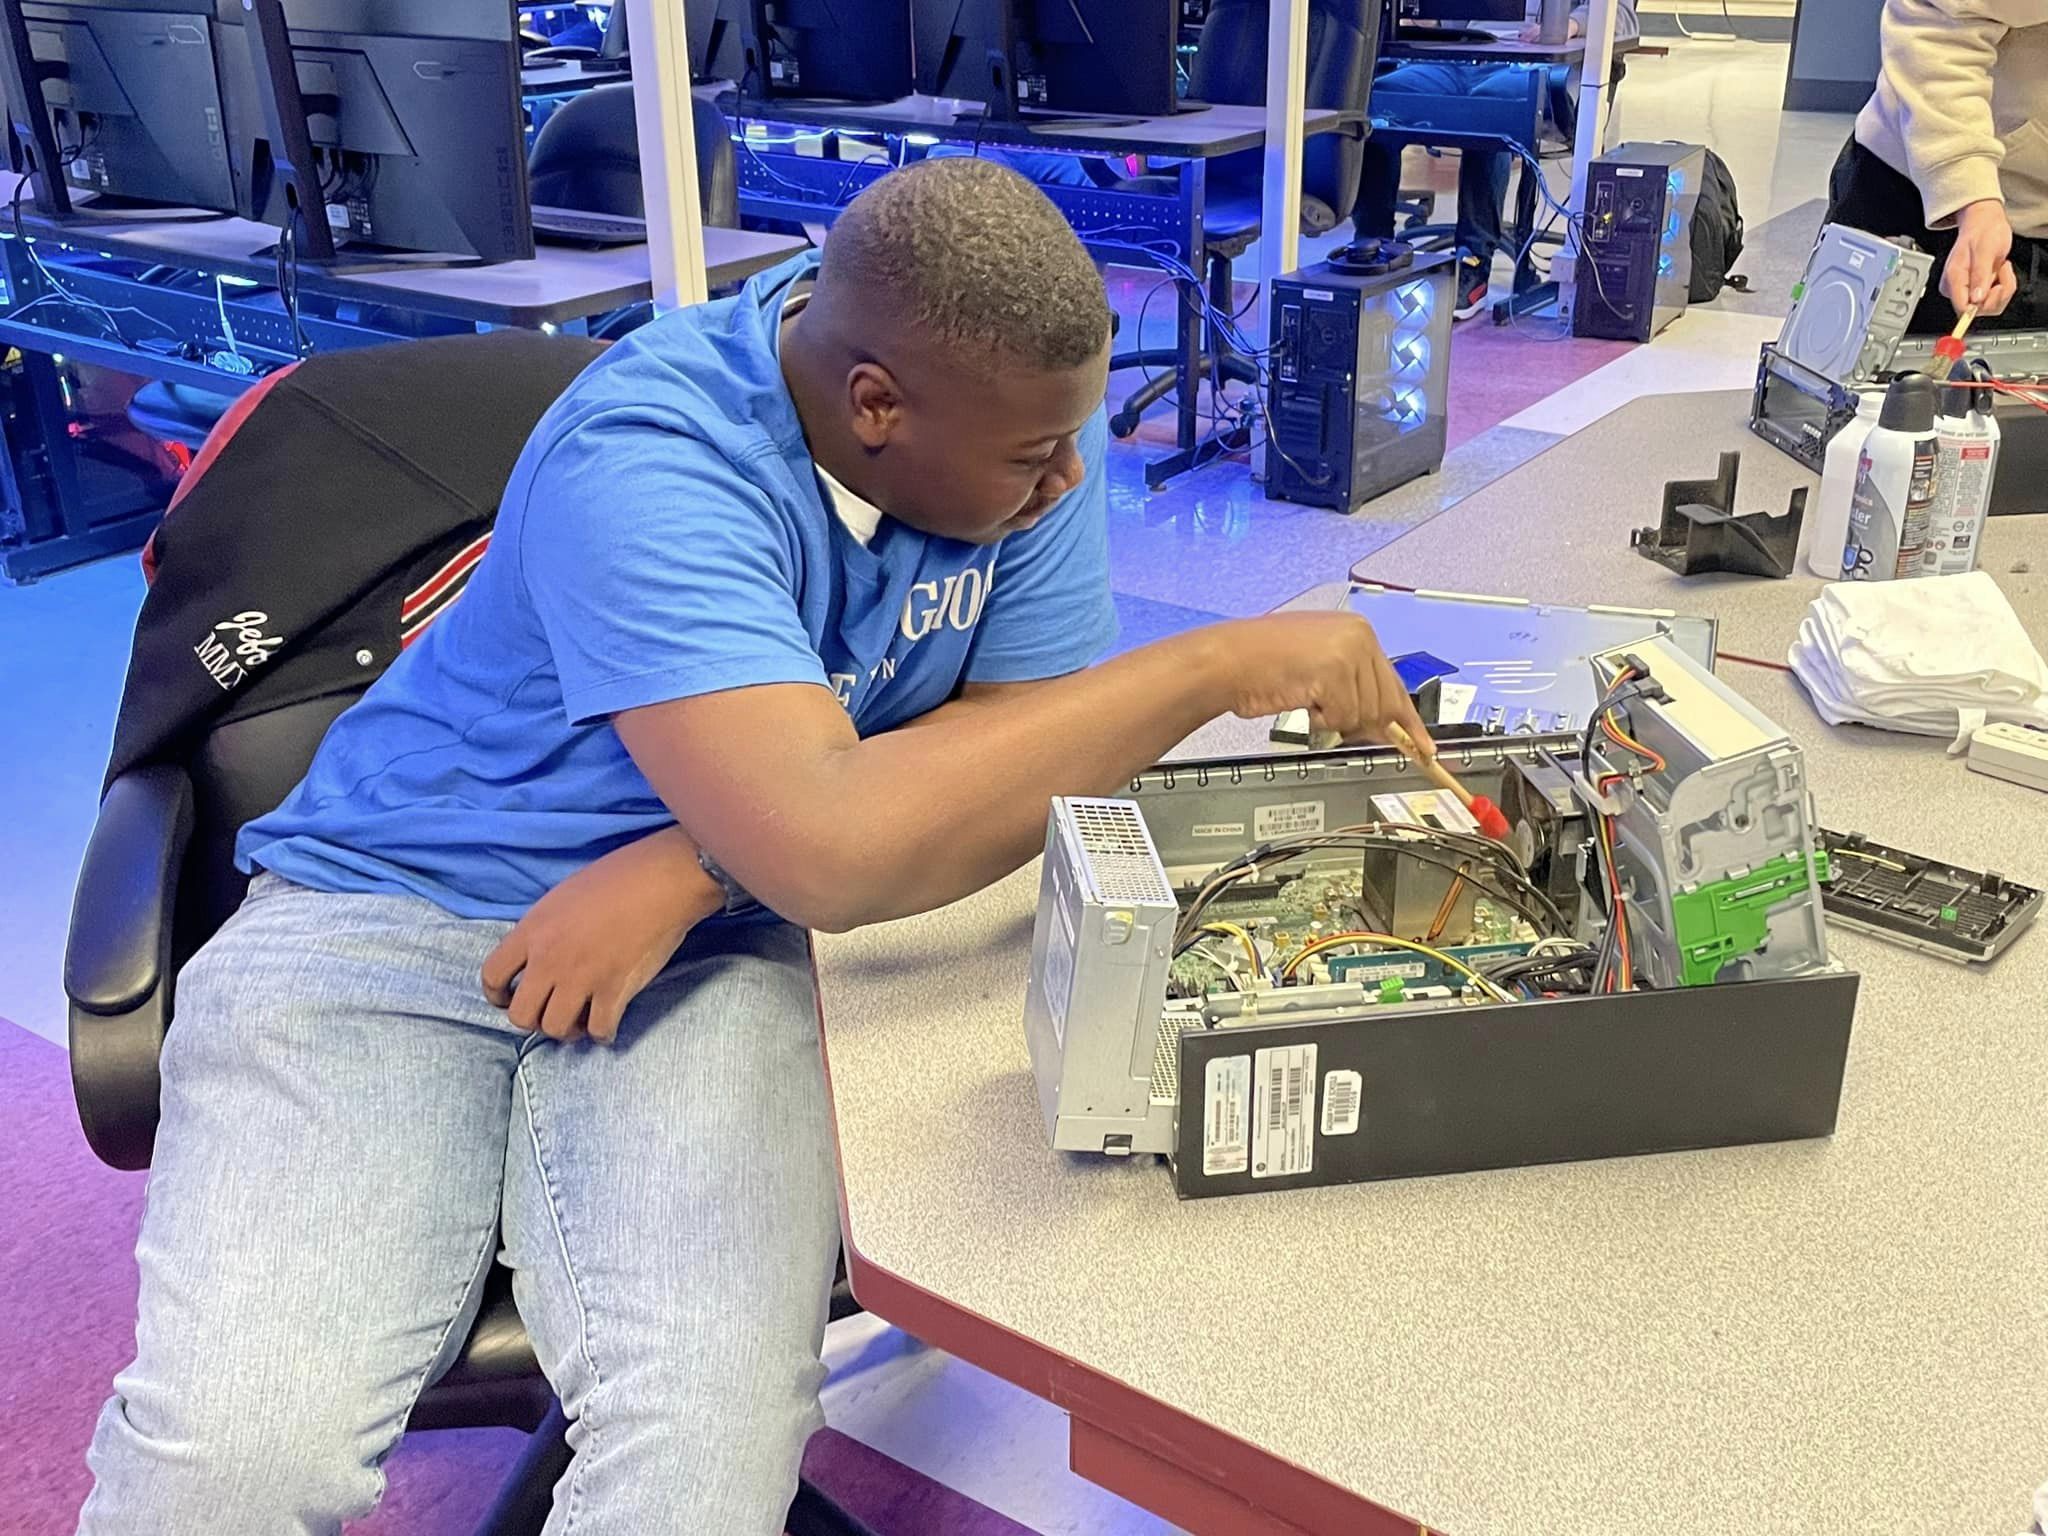 student working on the insides of a computer